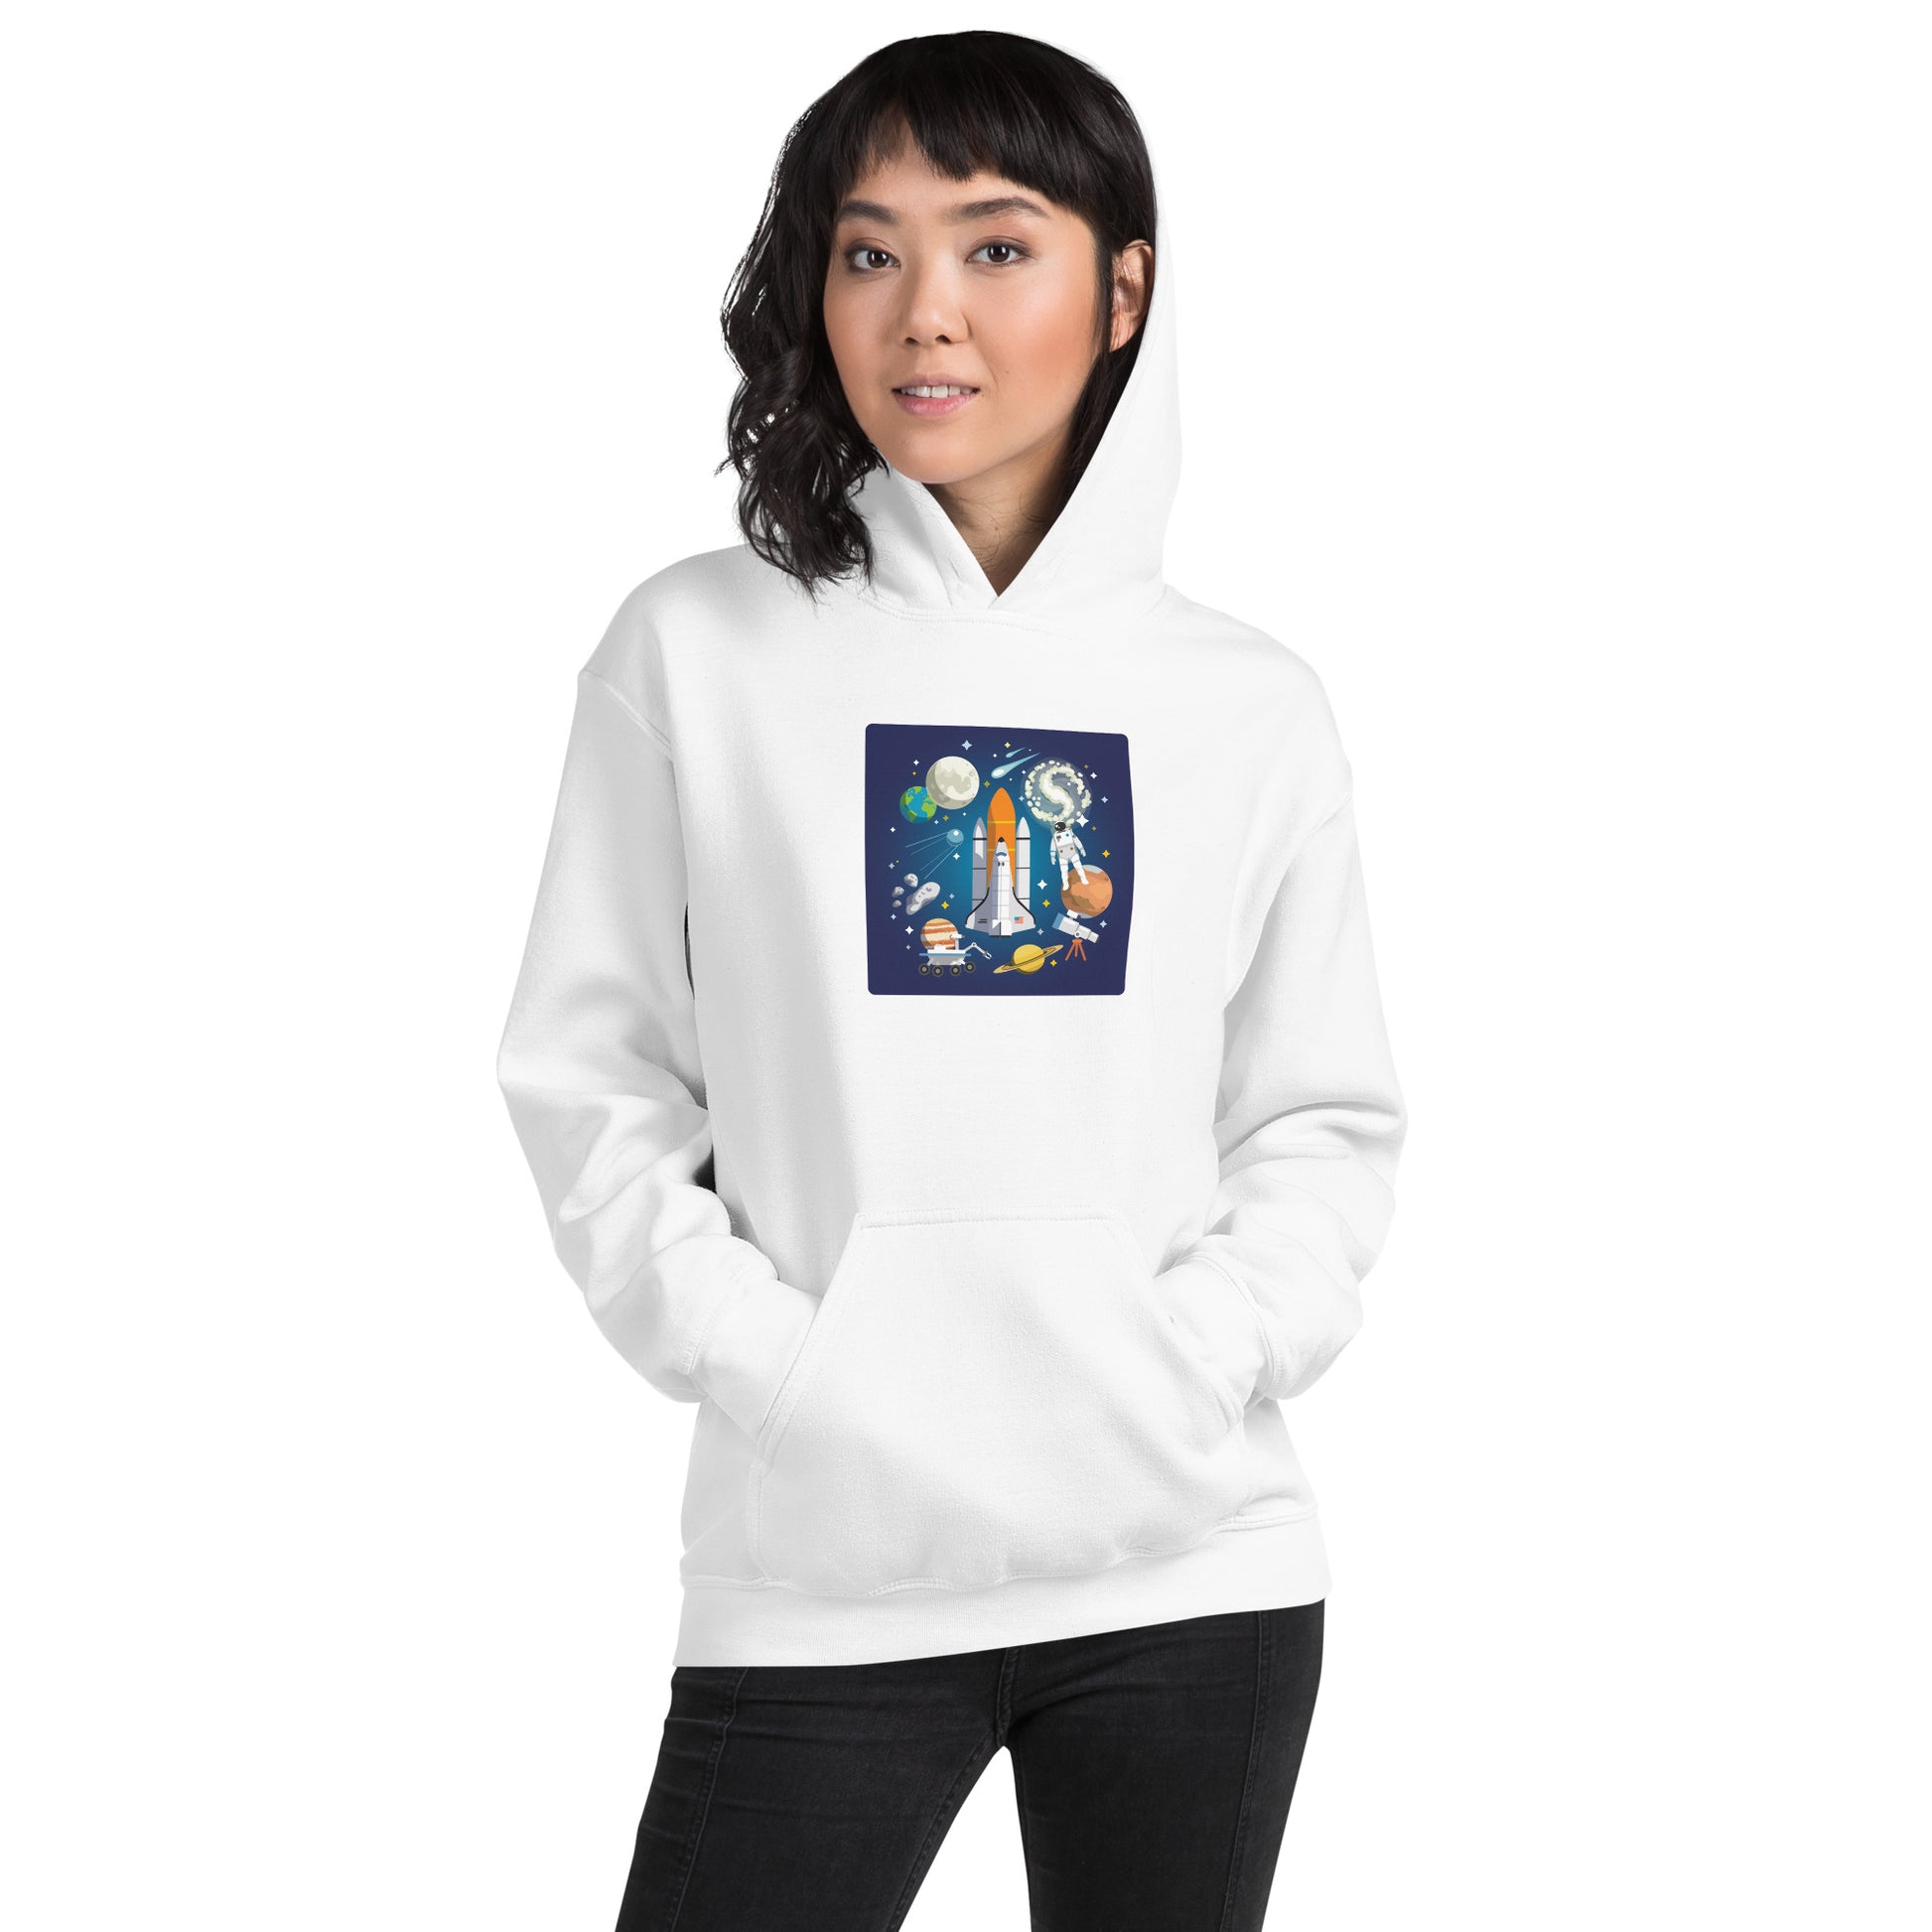 Space Exploration Starter Pack Hoodie - LuminoPlace